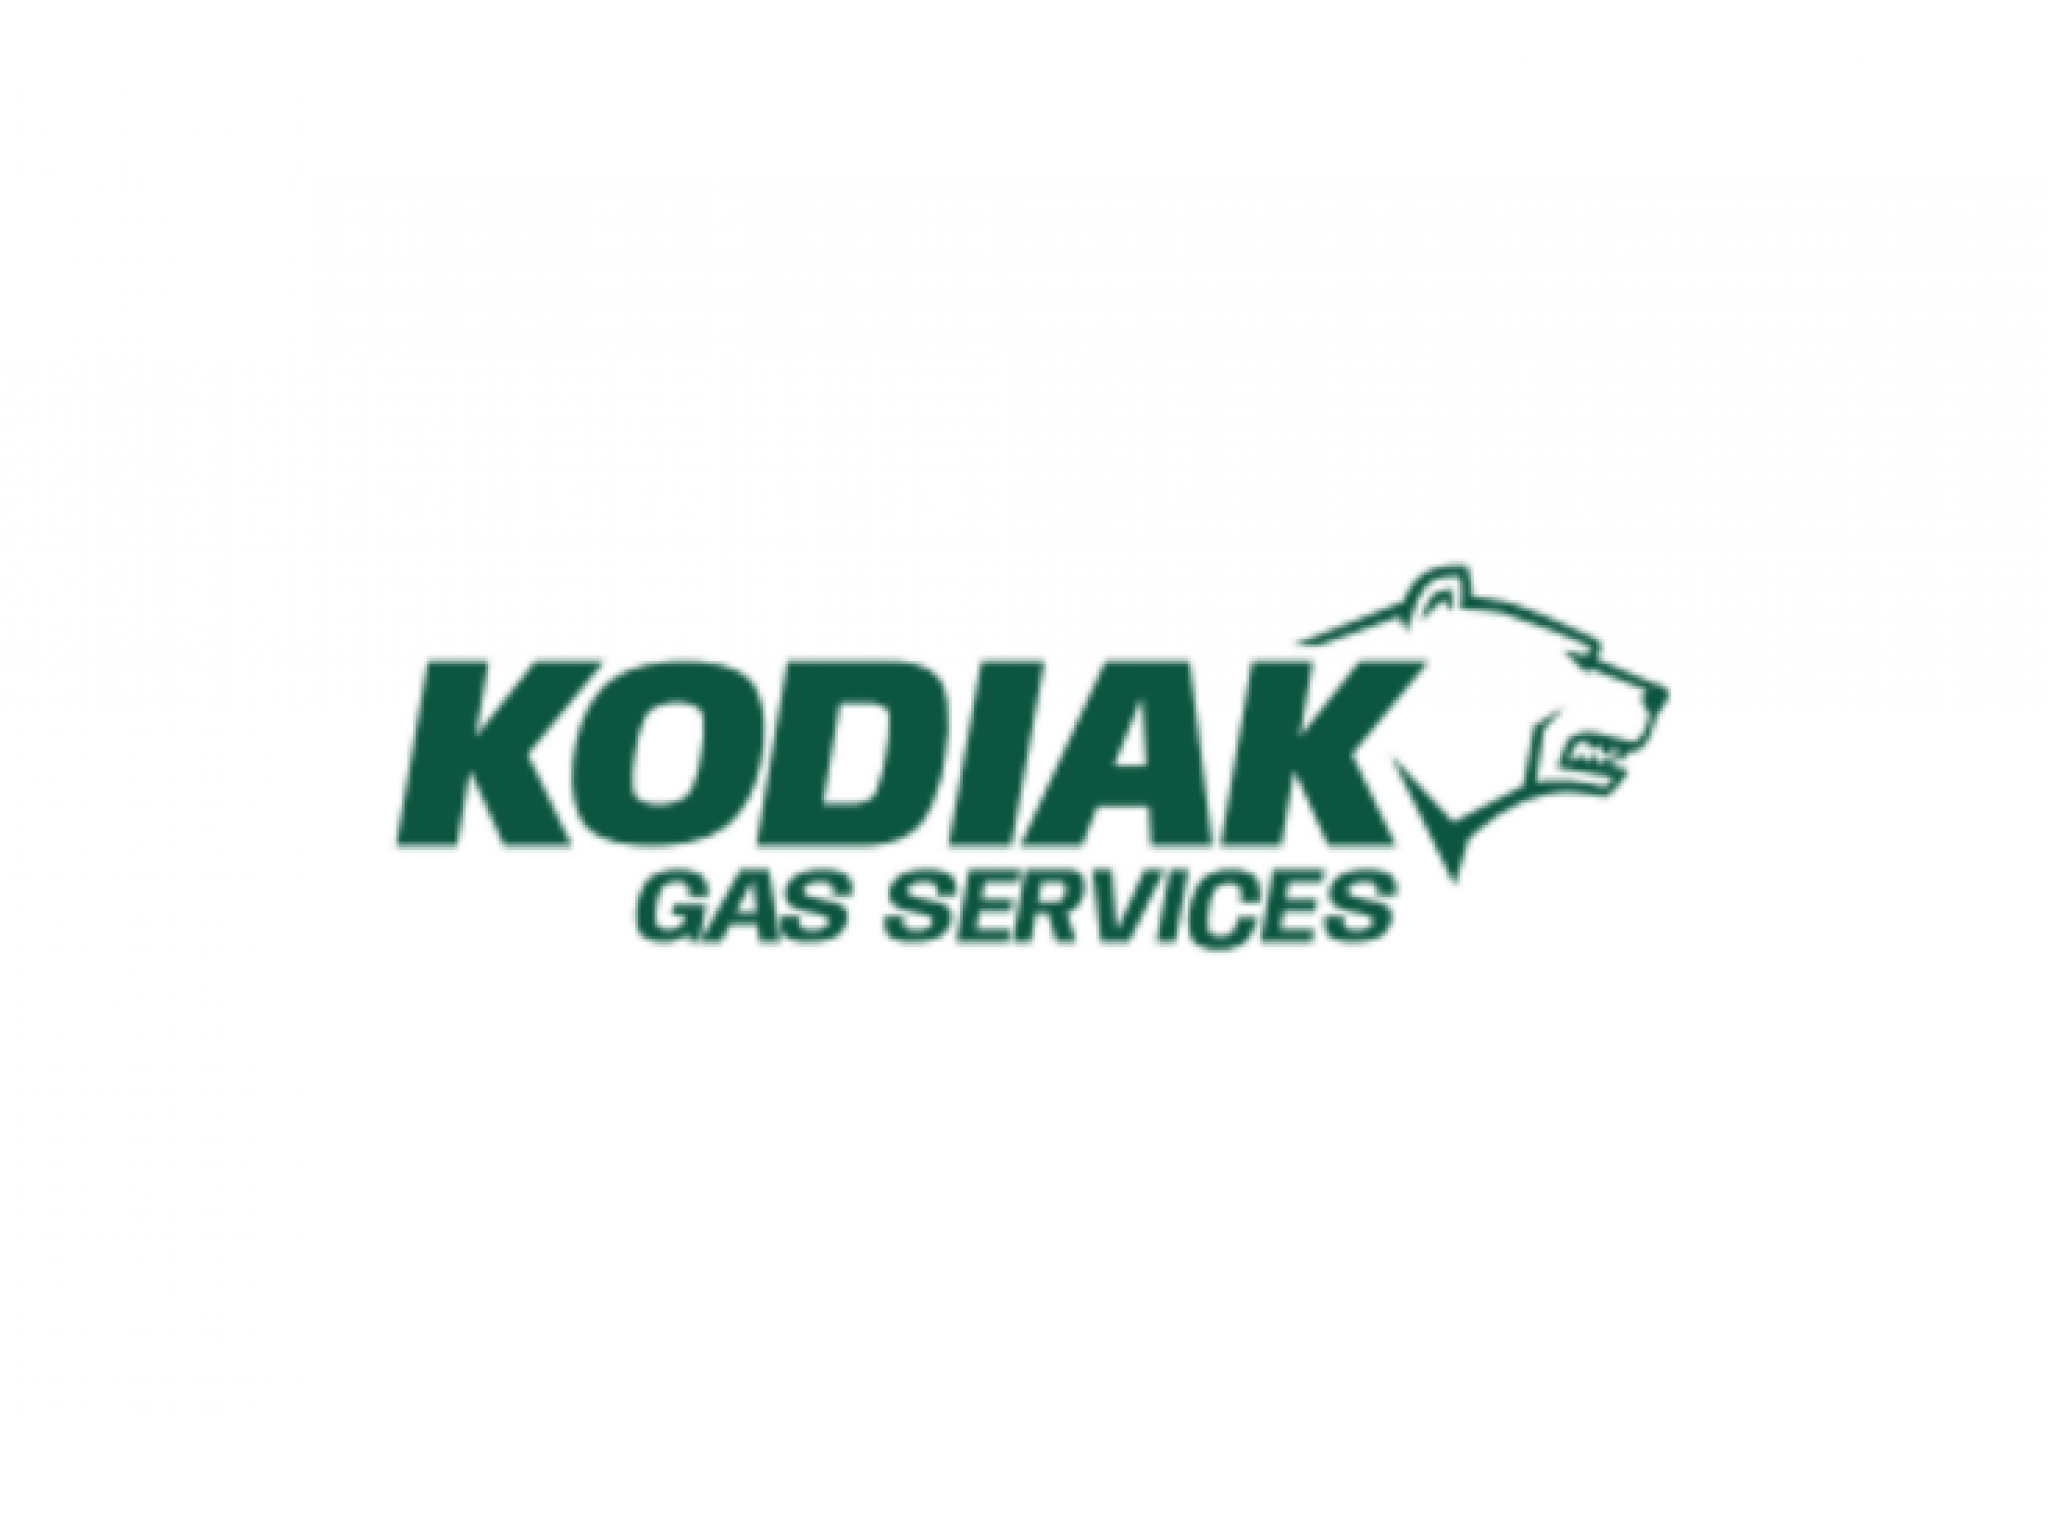  why-kodiak-gas-services-shares-are-down-today 